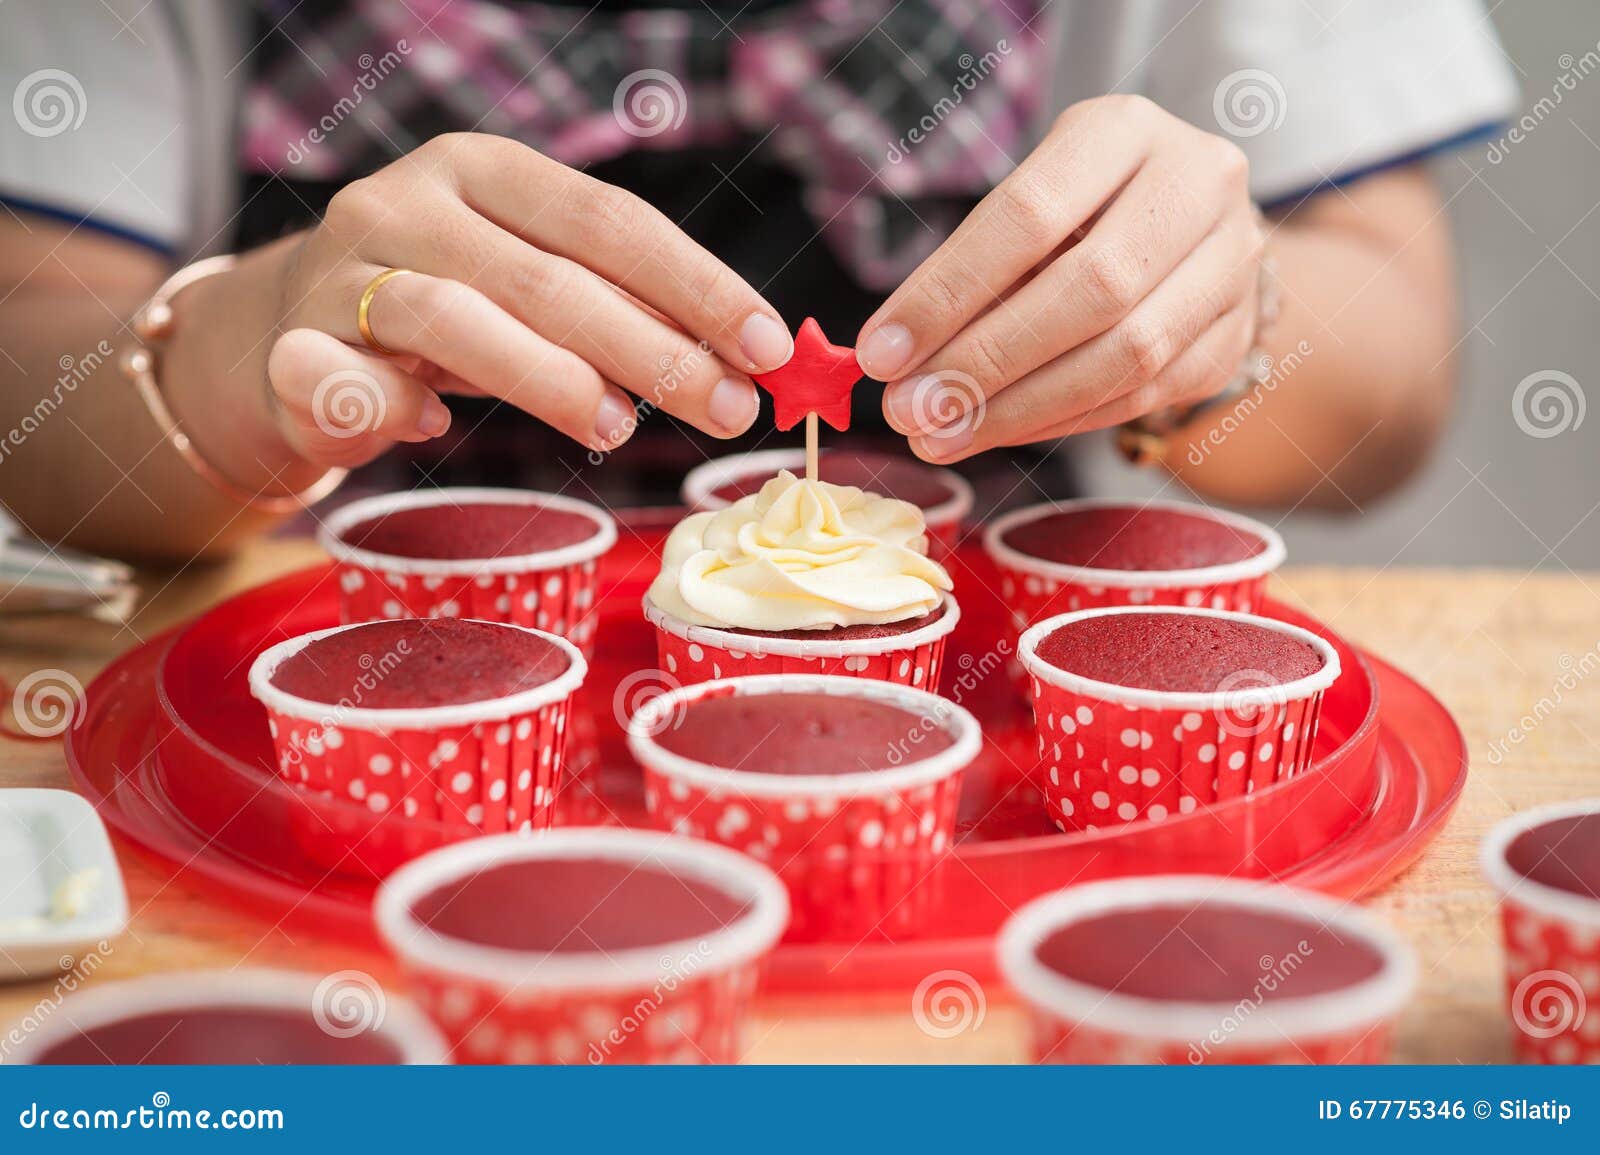 120 Fondant Tools Stock Photos - Free & Royalty-Free Stock Photos from  Dreamstime